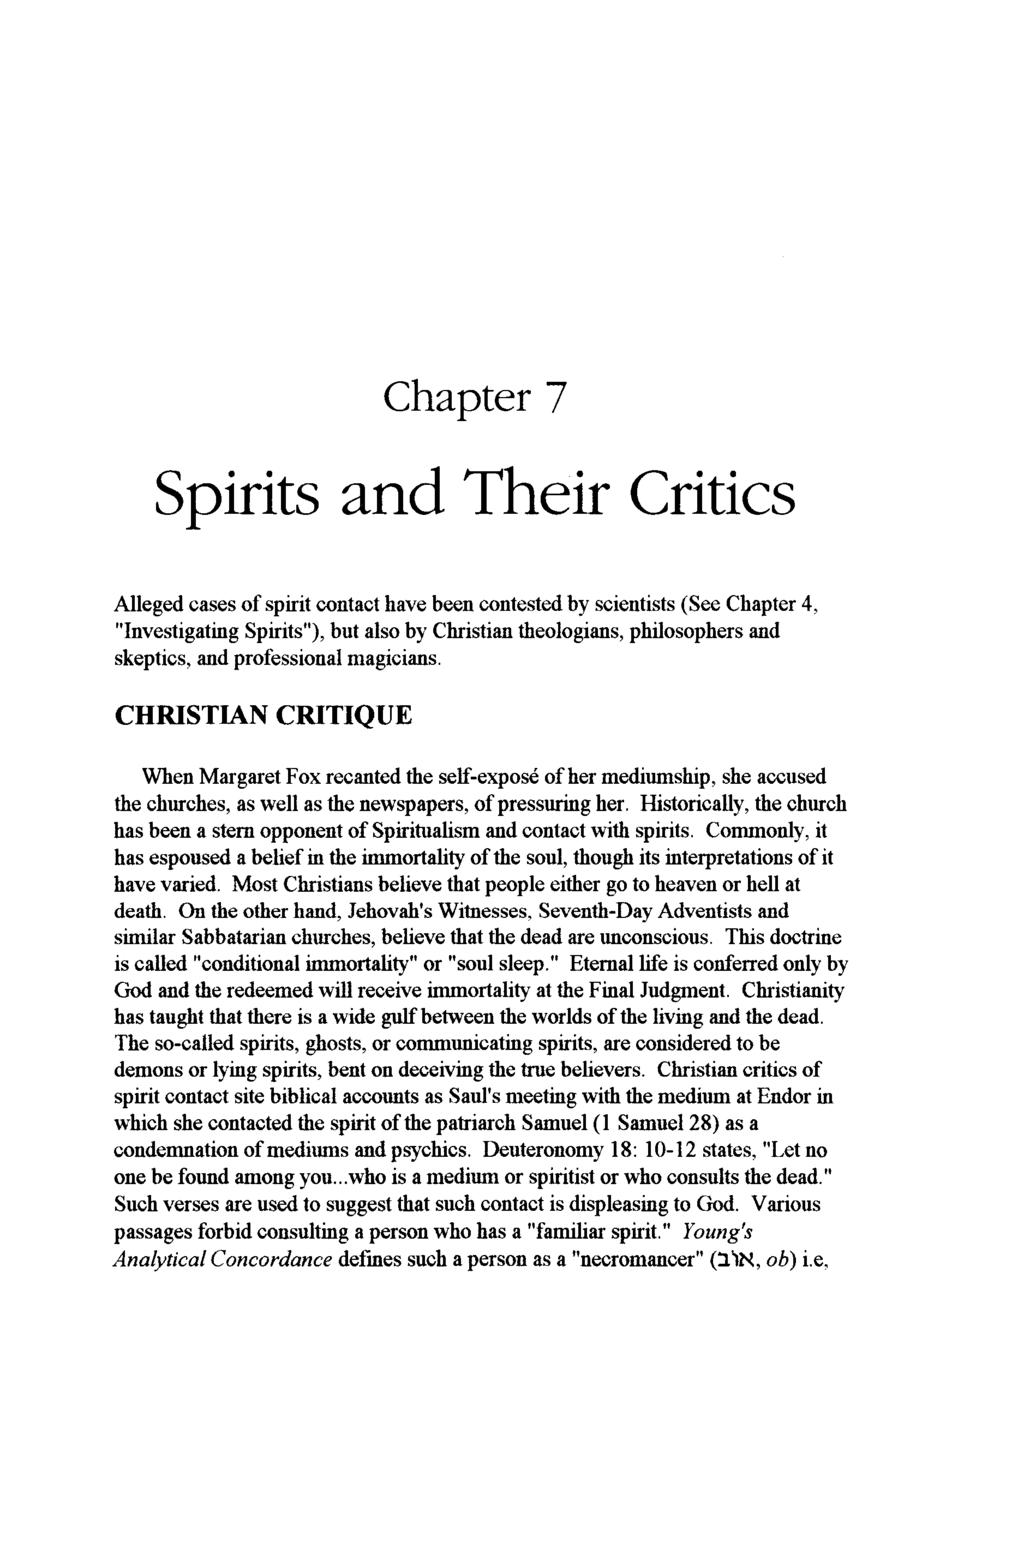 Chapter 7 Spirits and Their Critics Alleged cases of spirit contact have been contested by scientists (See Chapter 4, "Investigating Spirits"), but also by Christian theologians, philosophers and